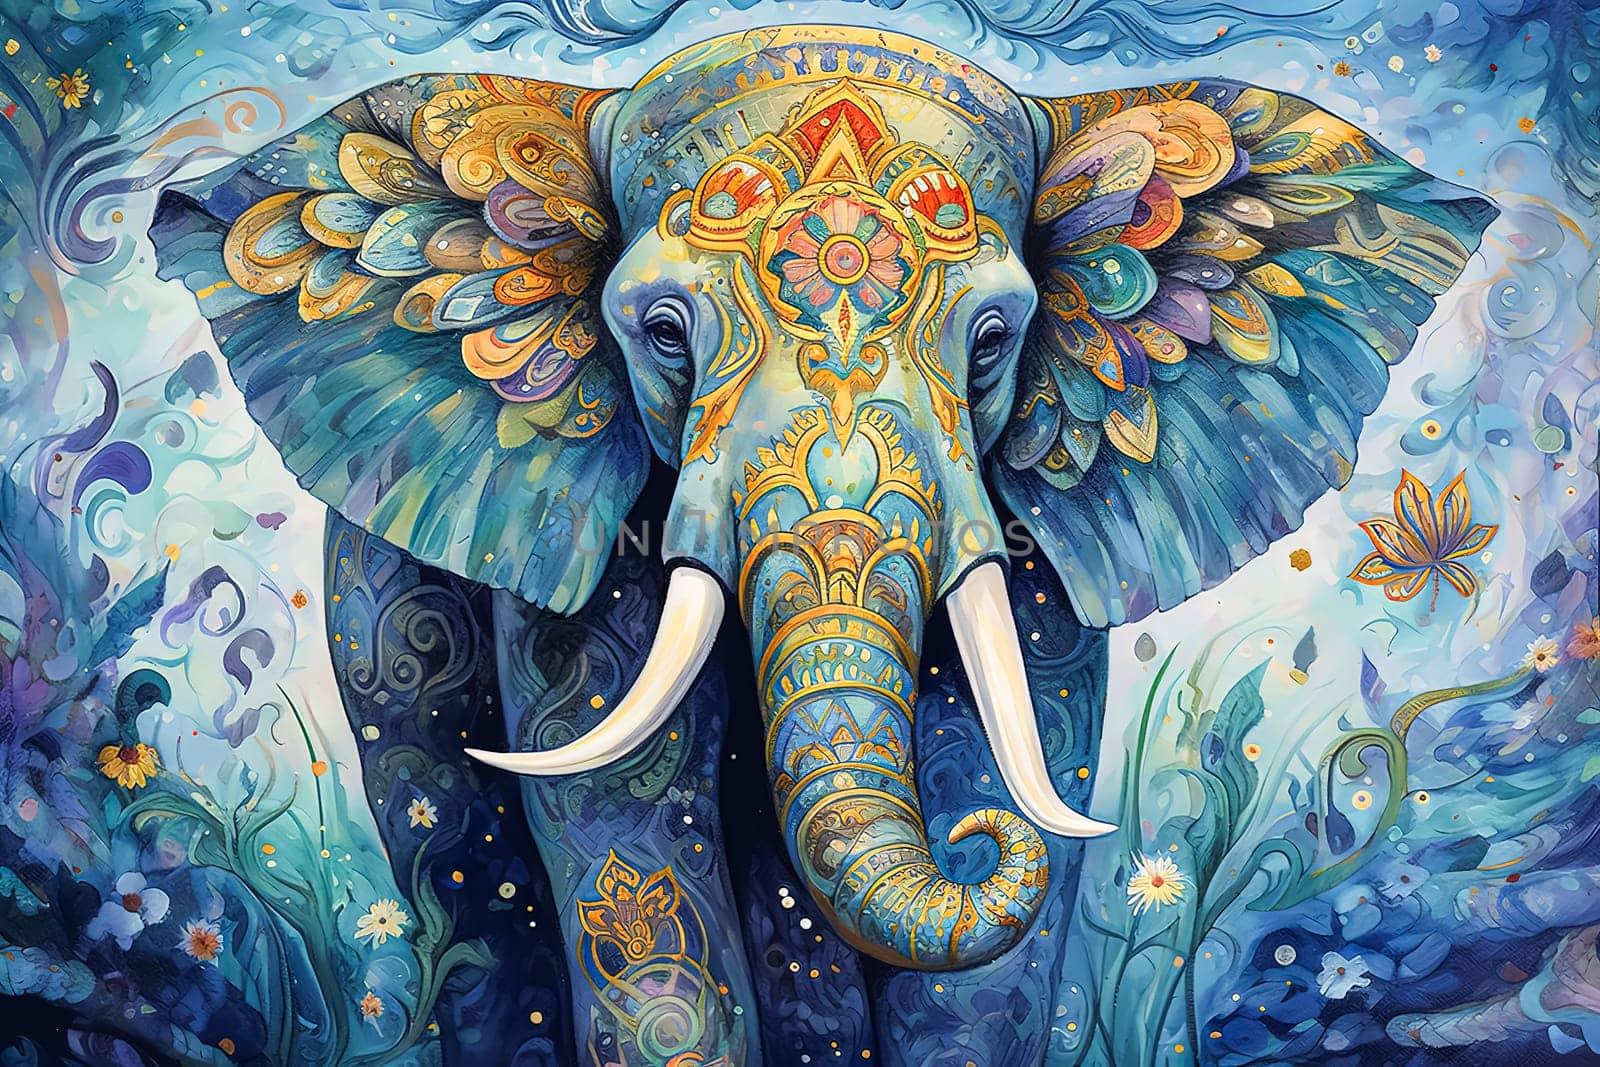 A colorful elephant is standing in a forest. The painting is vibrant and full of life, with the elephant being the main focus. The colors of the elephant